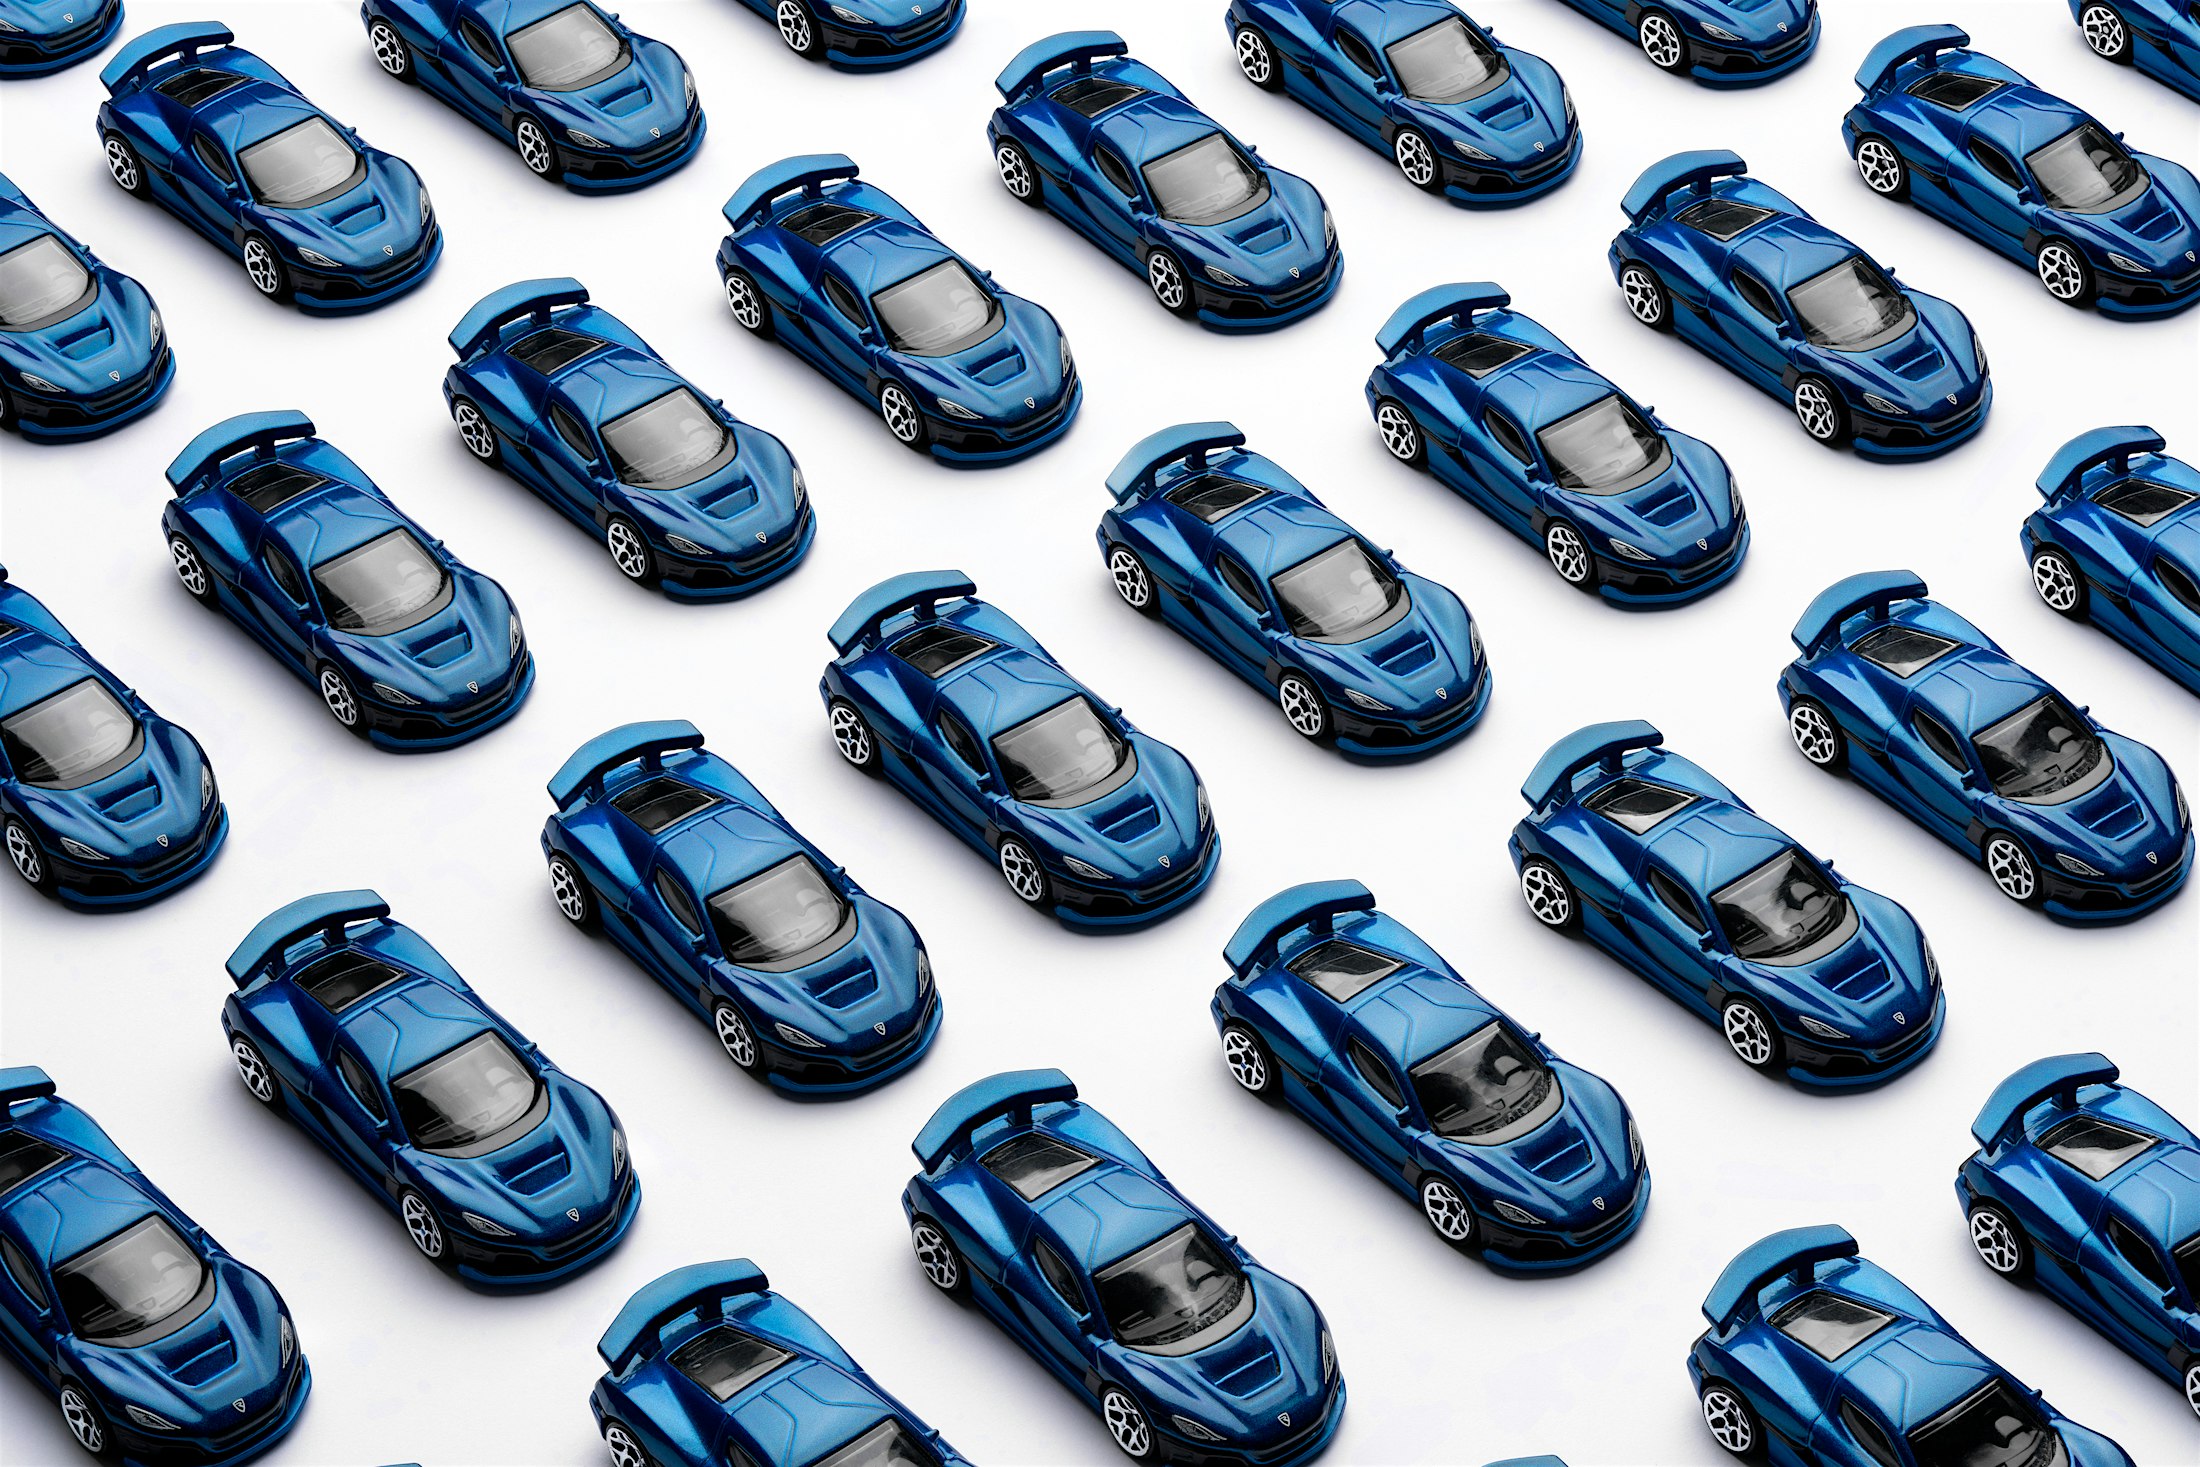 The Rimac Nevera: Now Available in Miniature